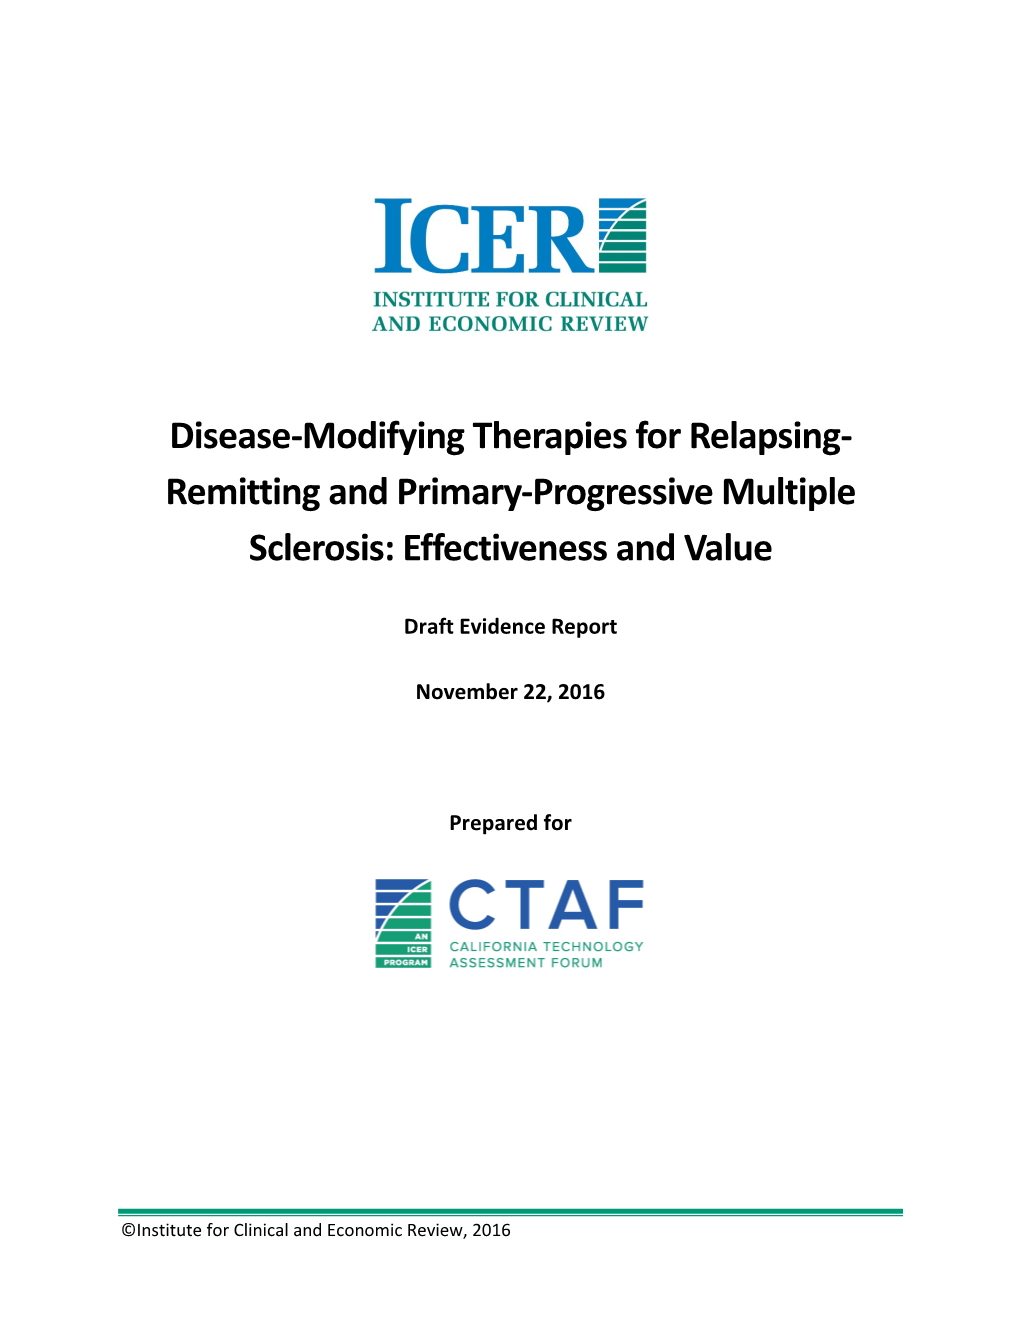 Remitting and Primary-Progressive Multiple Sclerosis: Effectiveness and Value